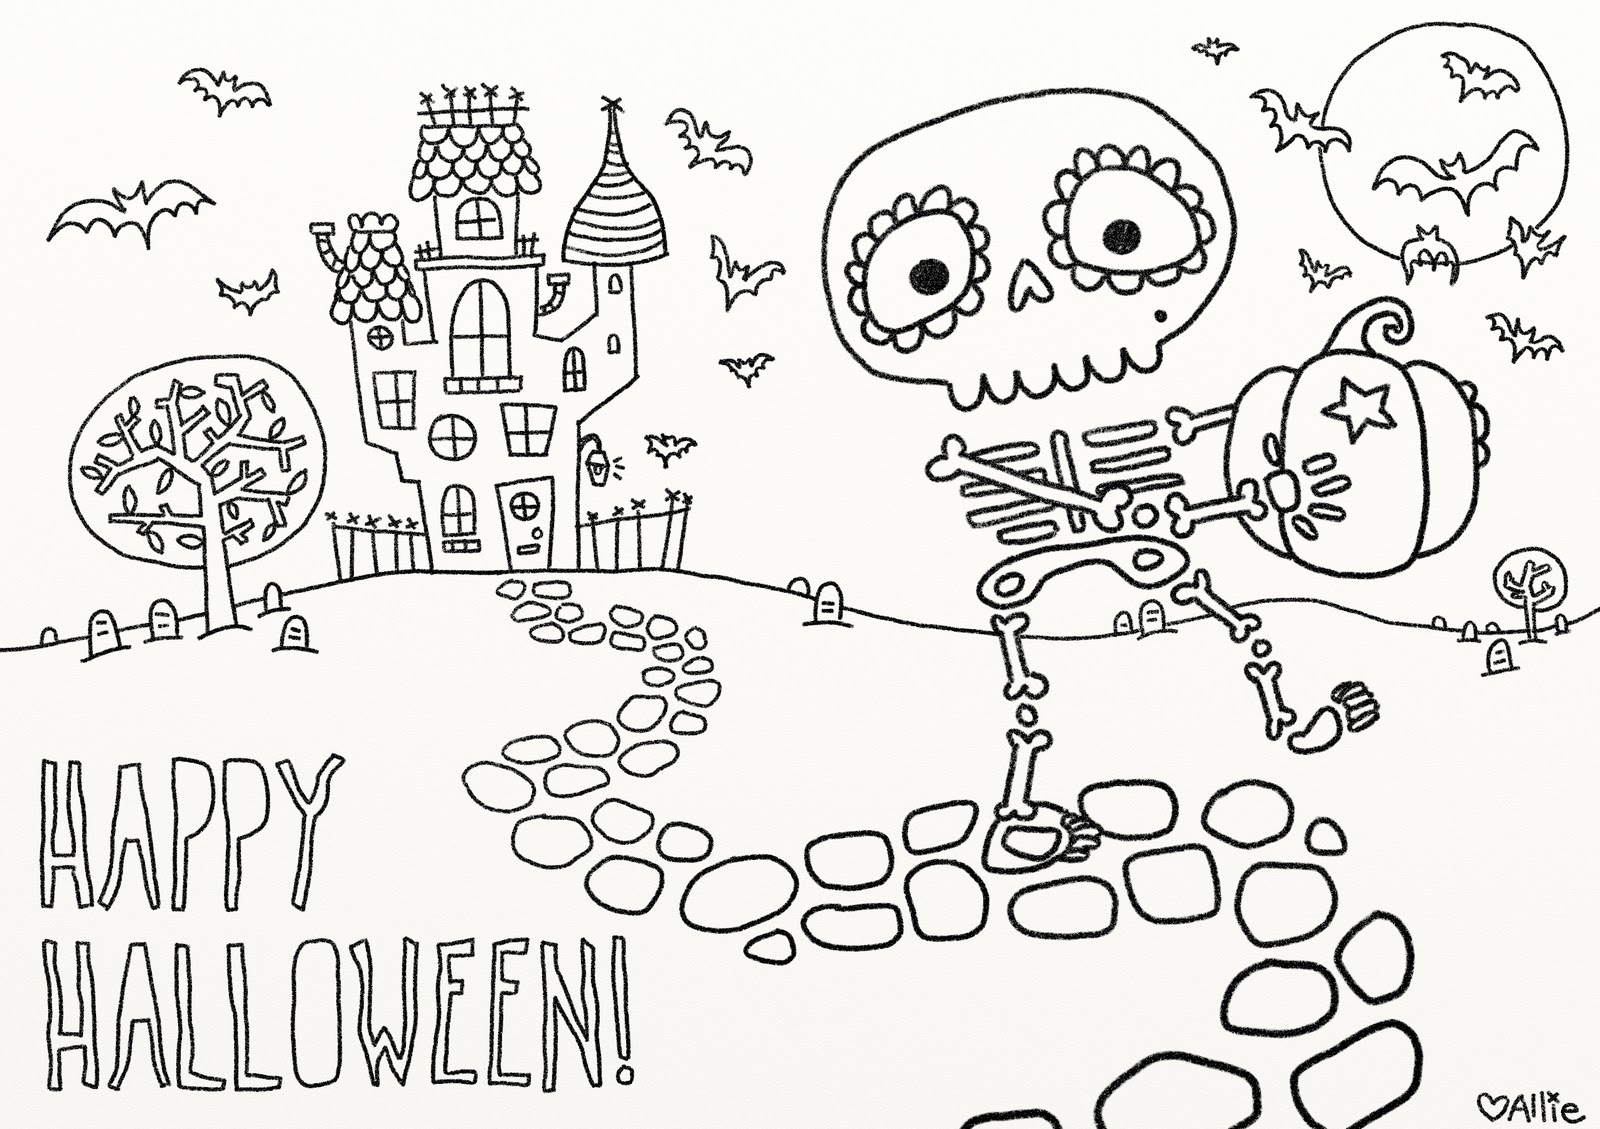 9 Fun Free Printable Halloween Coloring Pages - Free Printable Halloween Coloring Pages